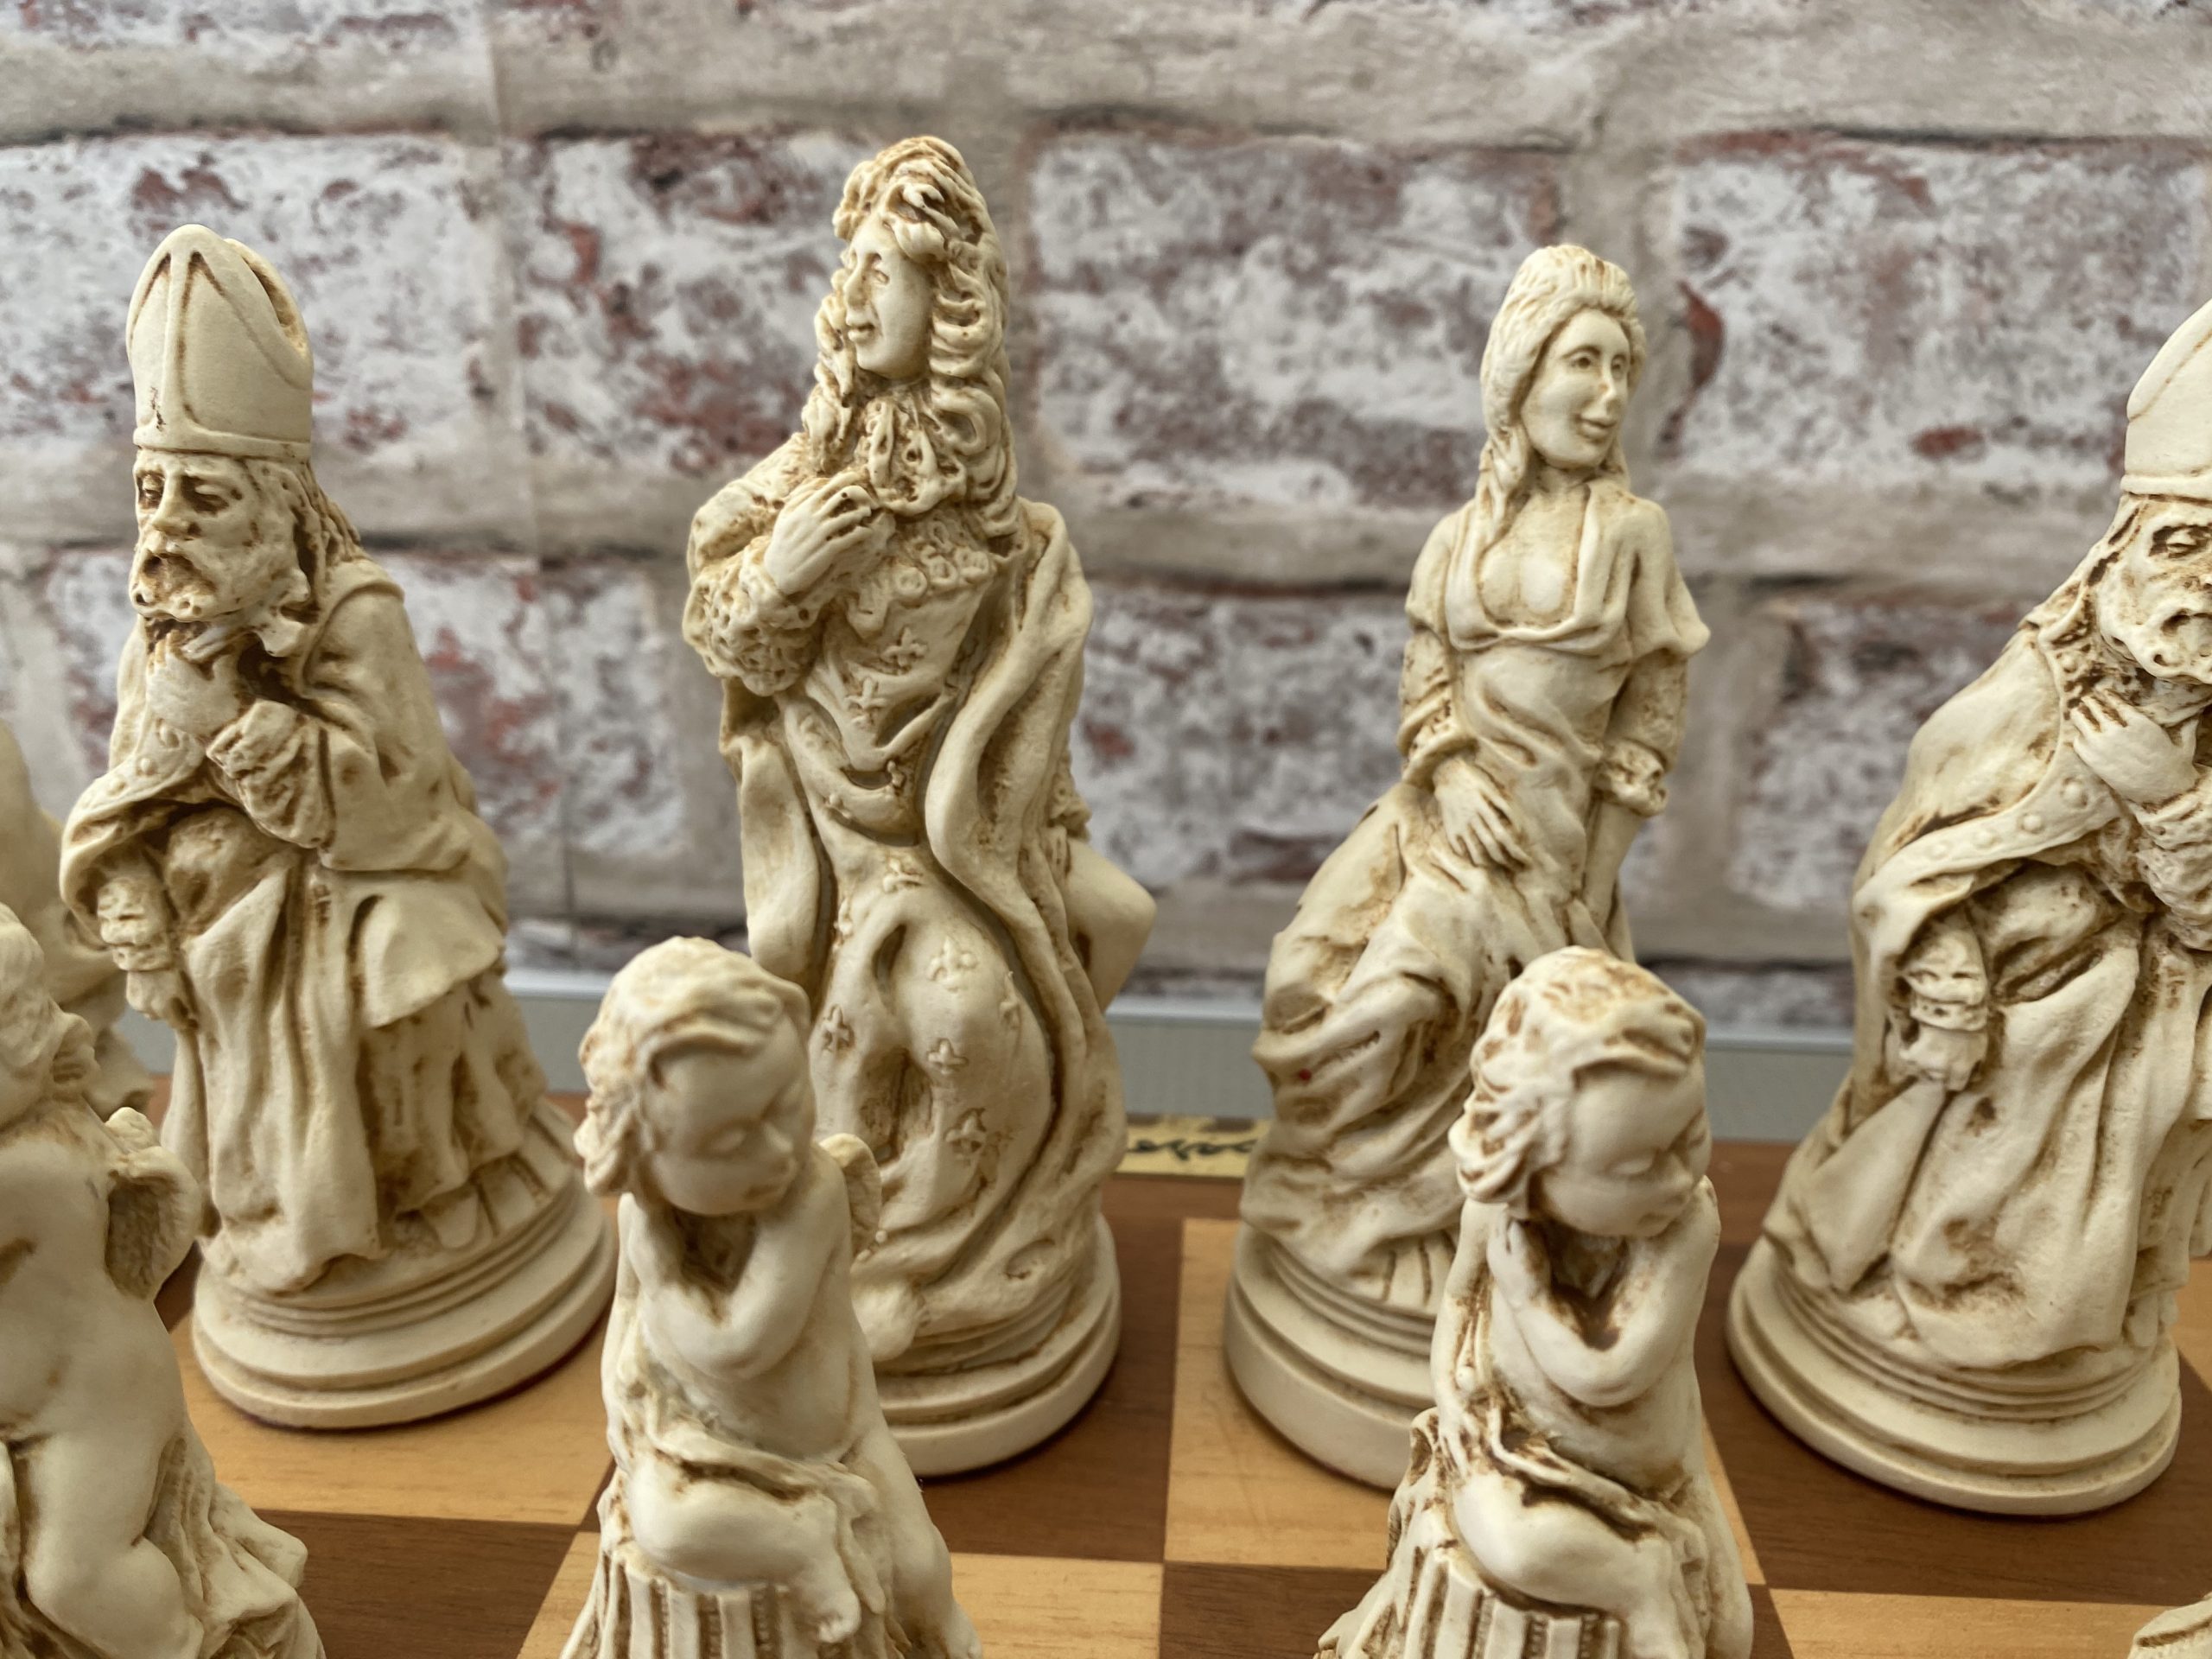 Special Offer Price Chess Set Louis Xiv Design in an Aged 